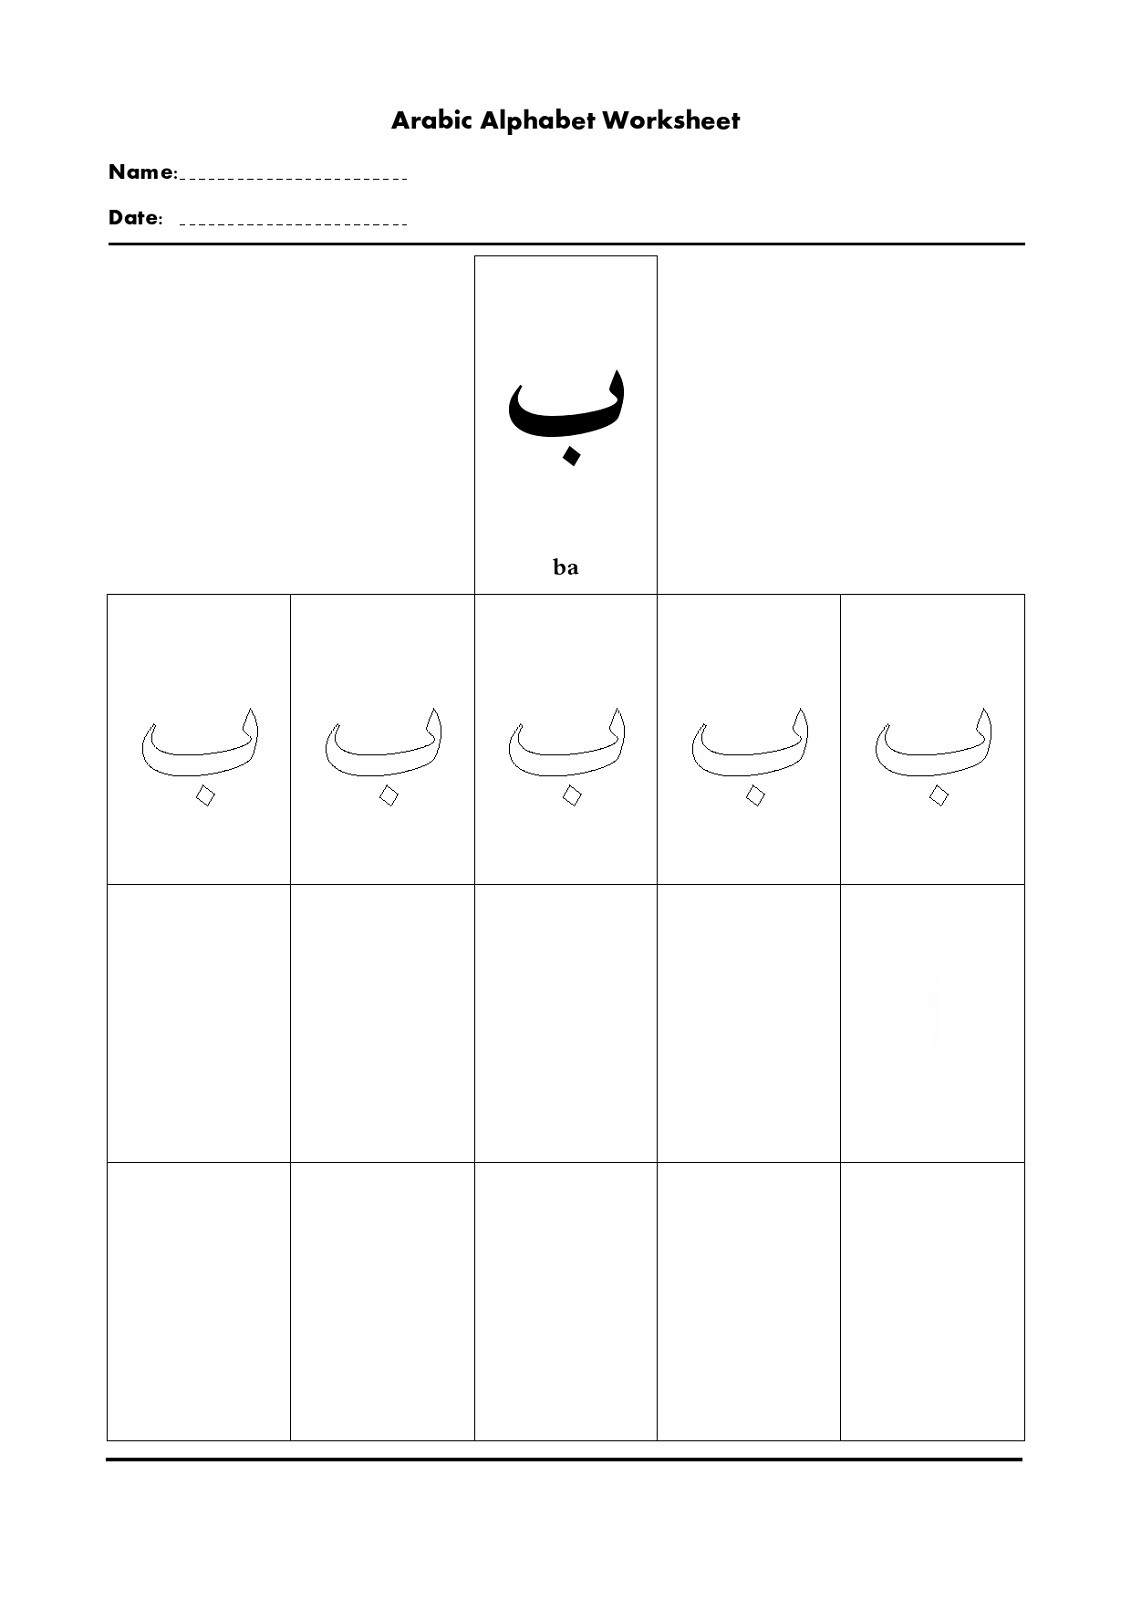 Arabic Alphabet Worksheets for Preschoolers Monthly Archives June 2020 Cbt for Adhd Worksheets Ict